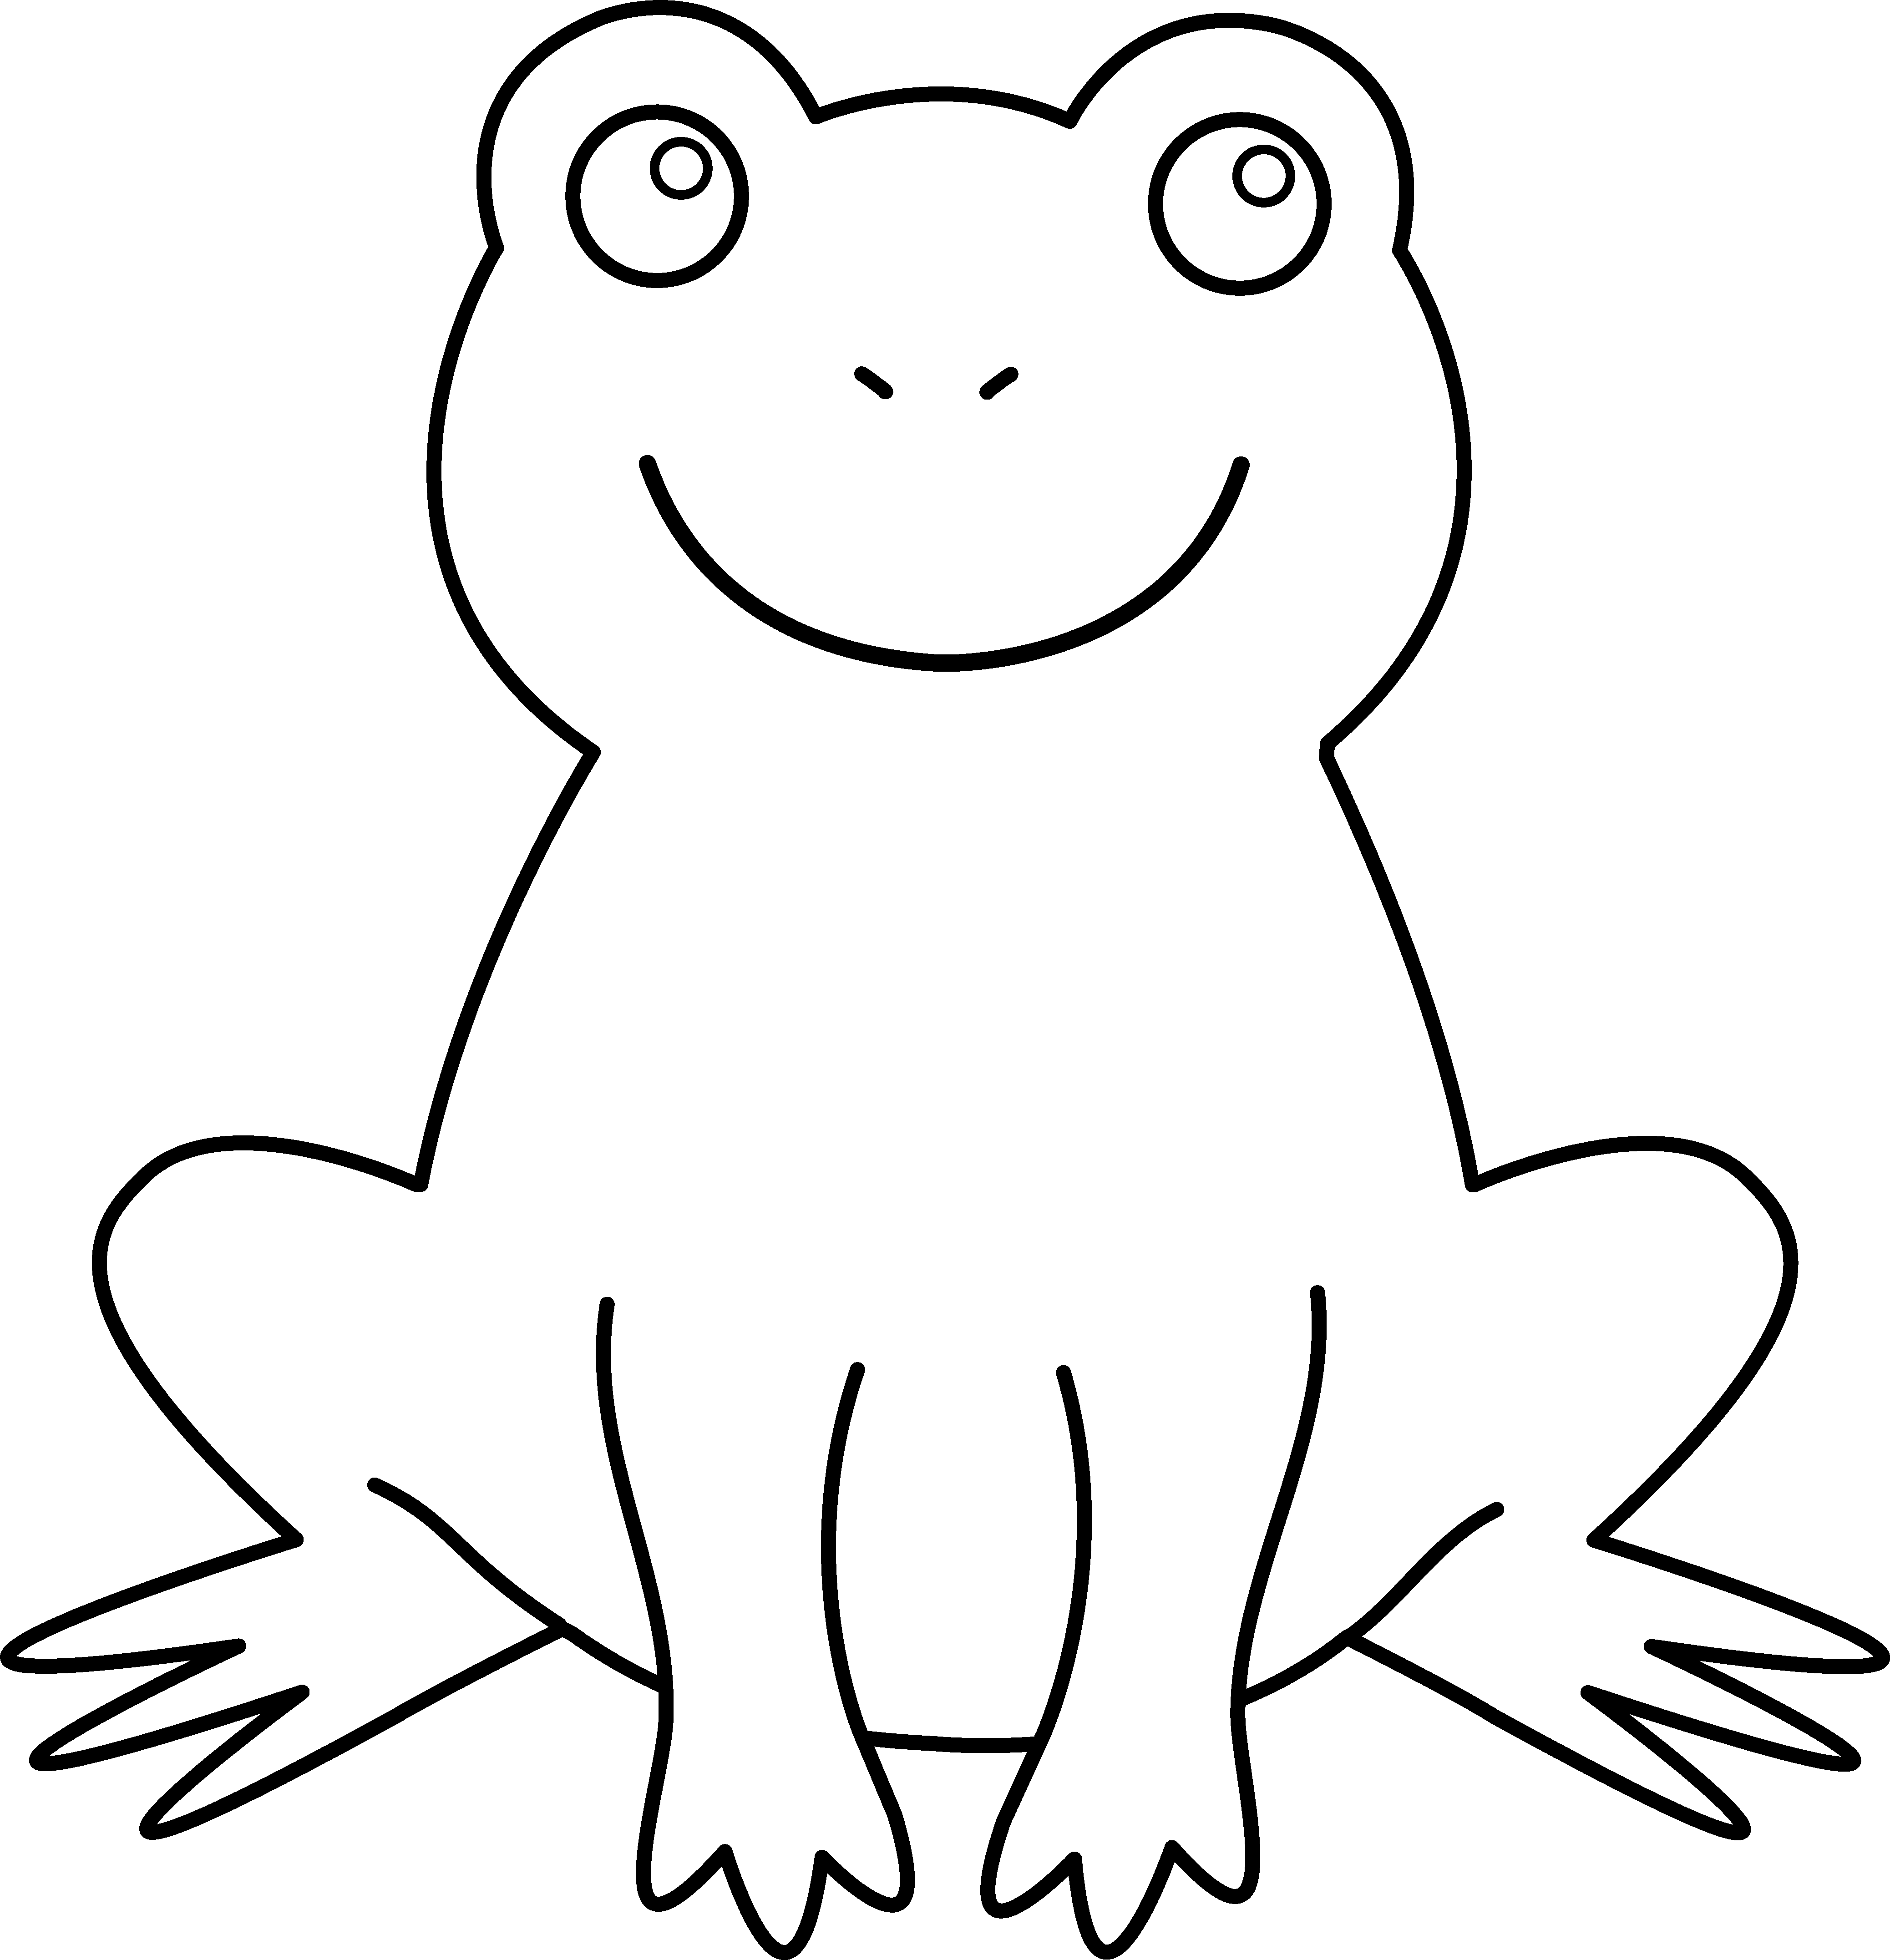 Toad Clipart Black And White   Clipart Panda   Free Clipart Images